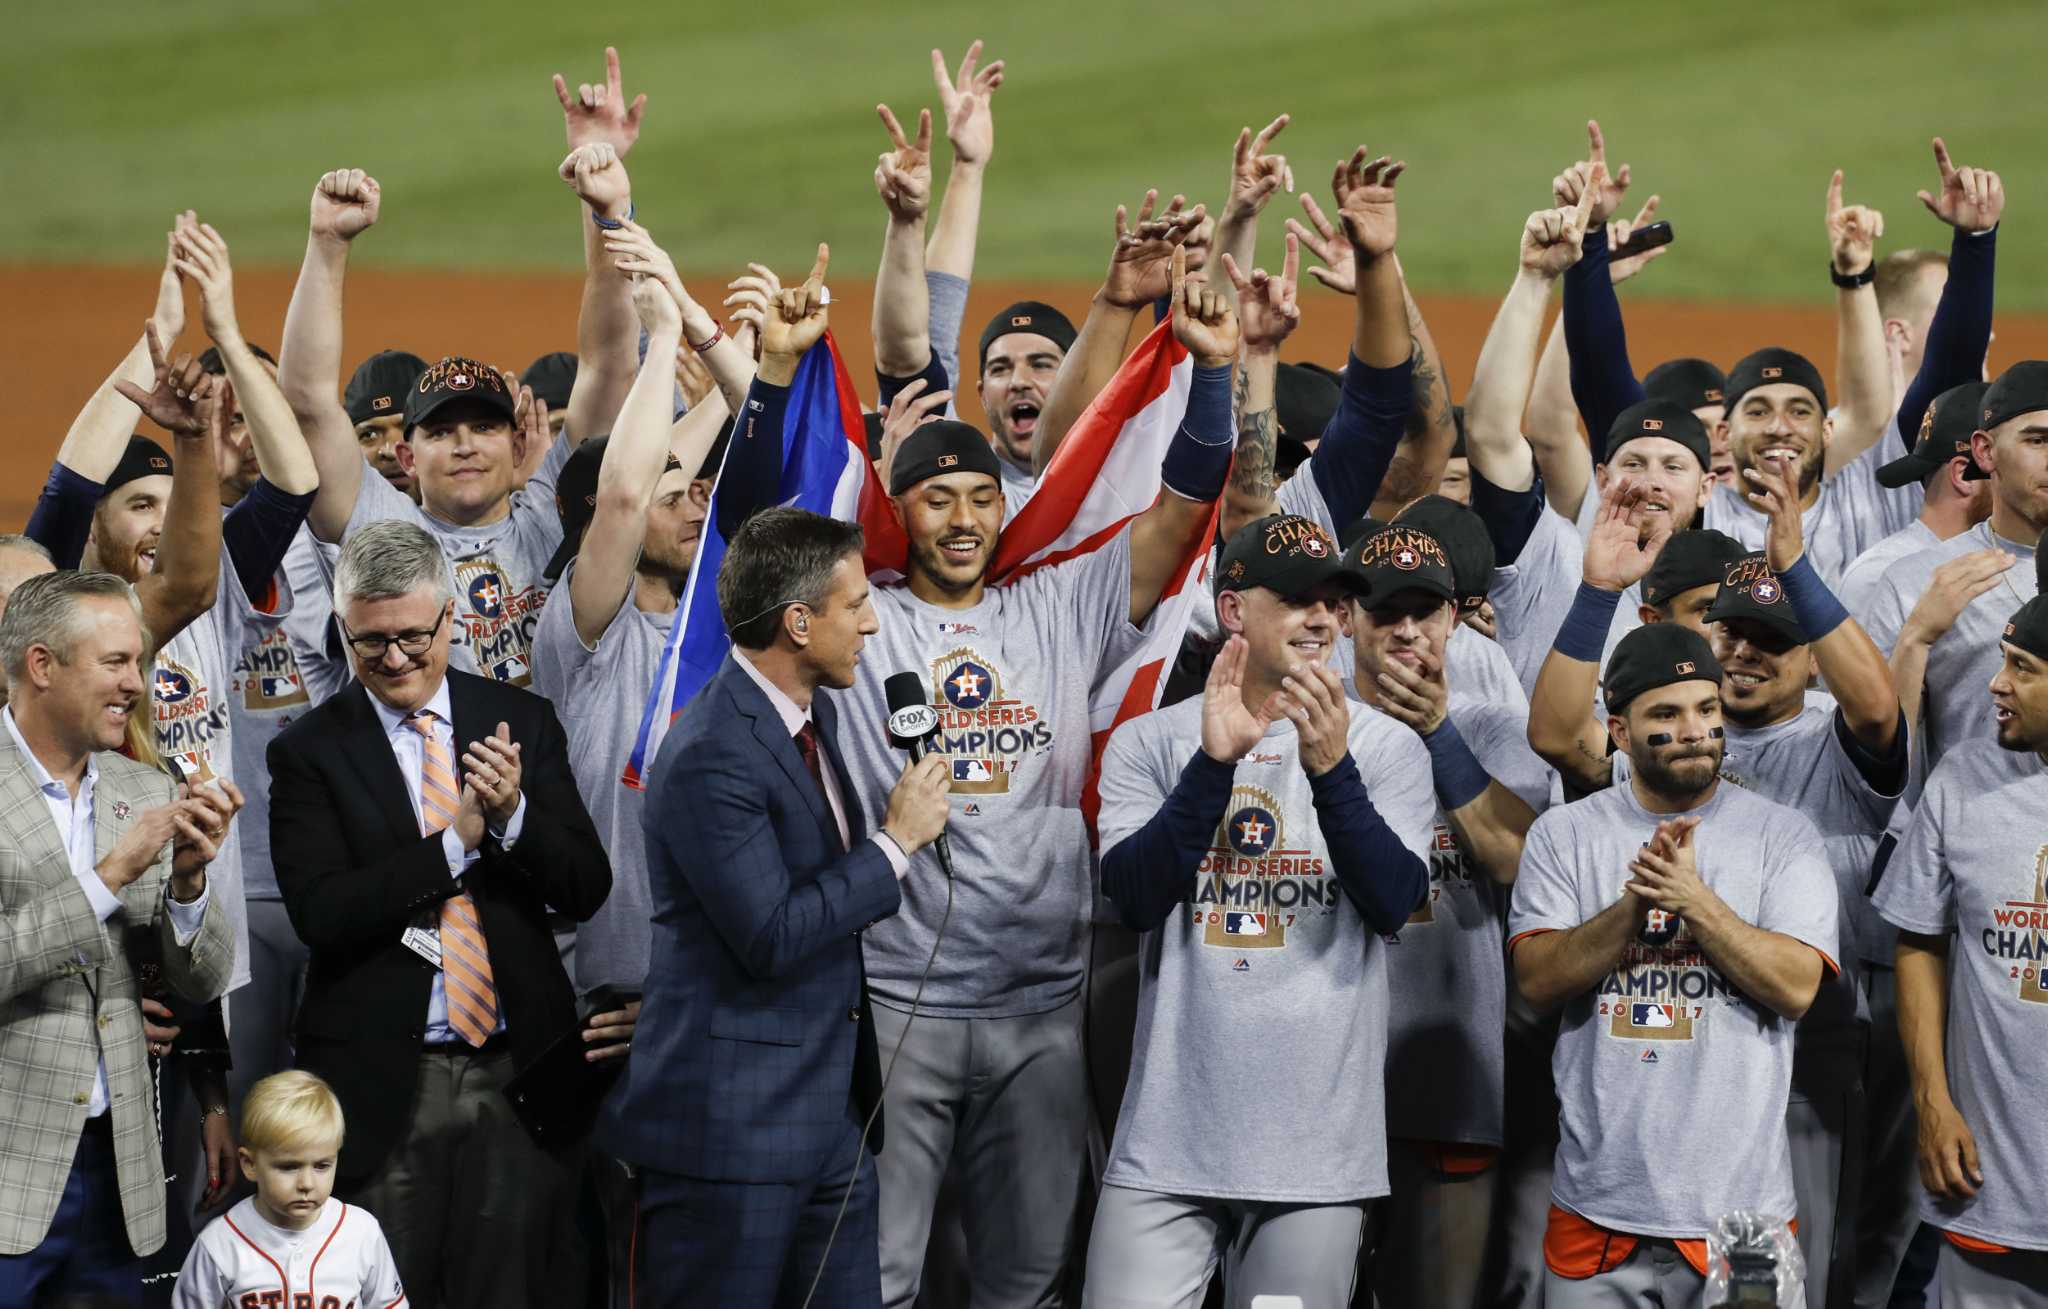 Houston Astros: Astroball is a must read for every baseball fan - Page 5